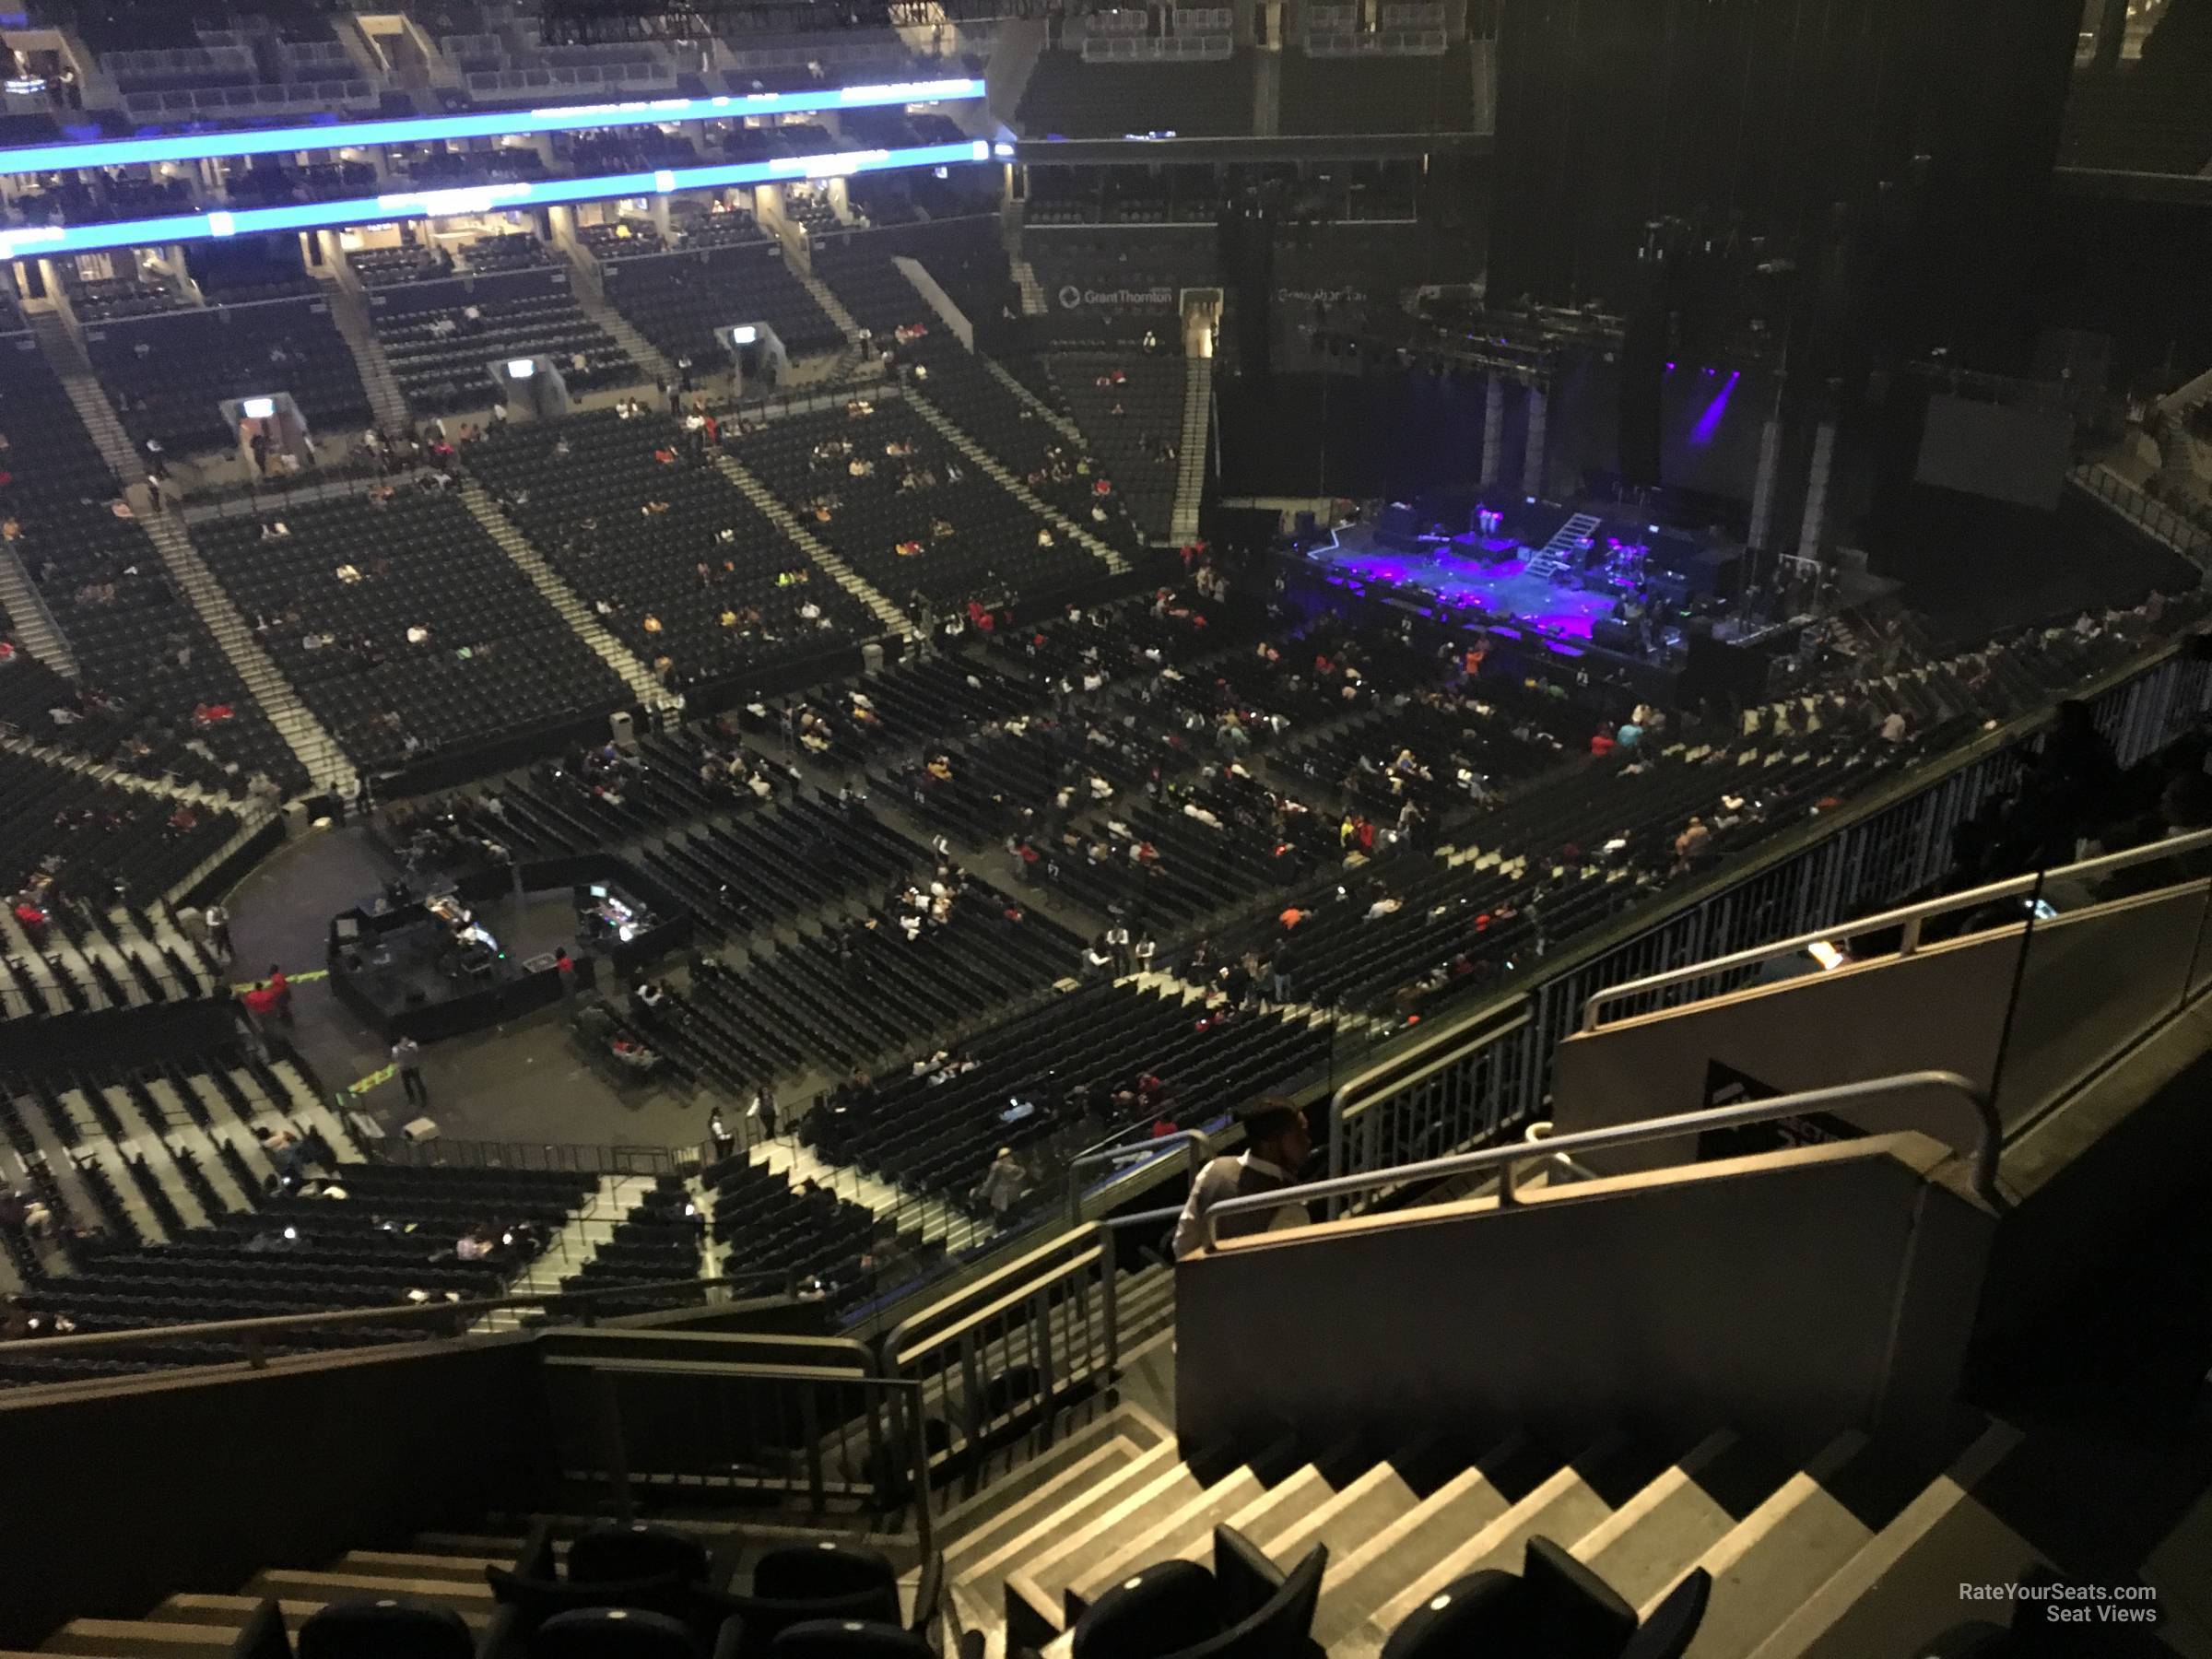 Barclays Center Section 211 Concert Seating - RateYourSeats.com